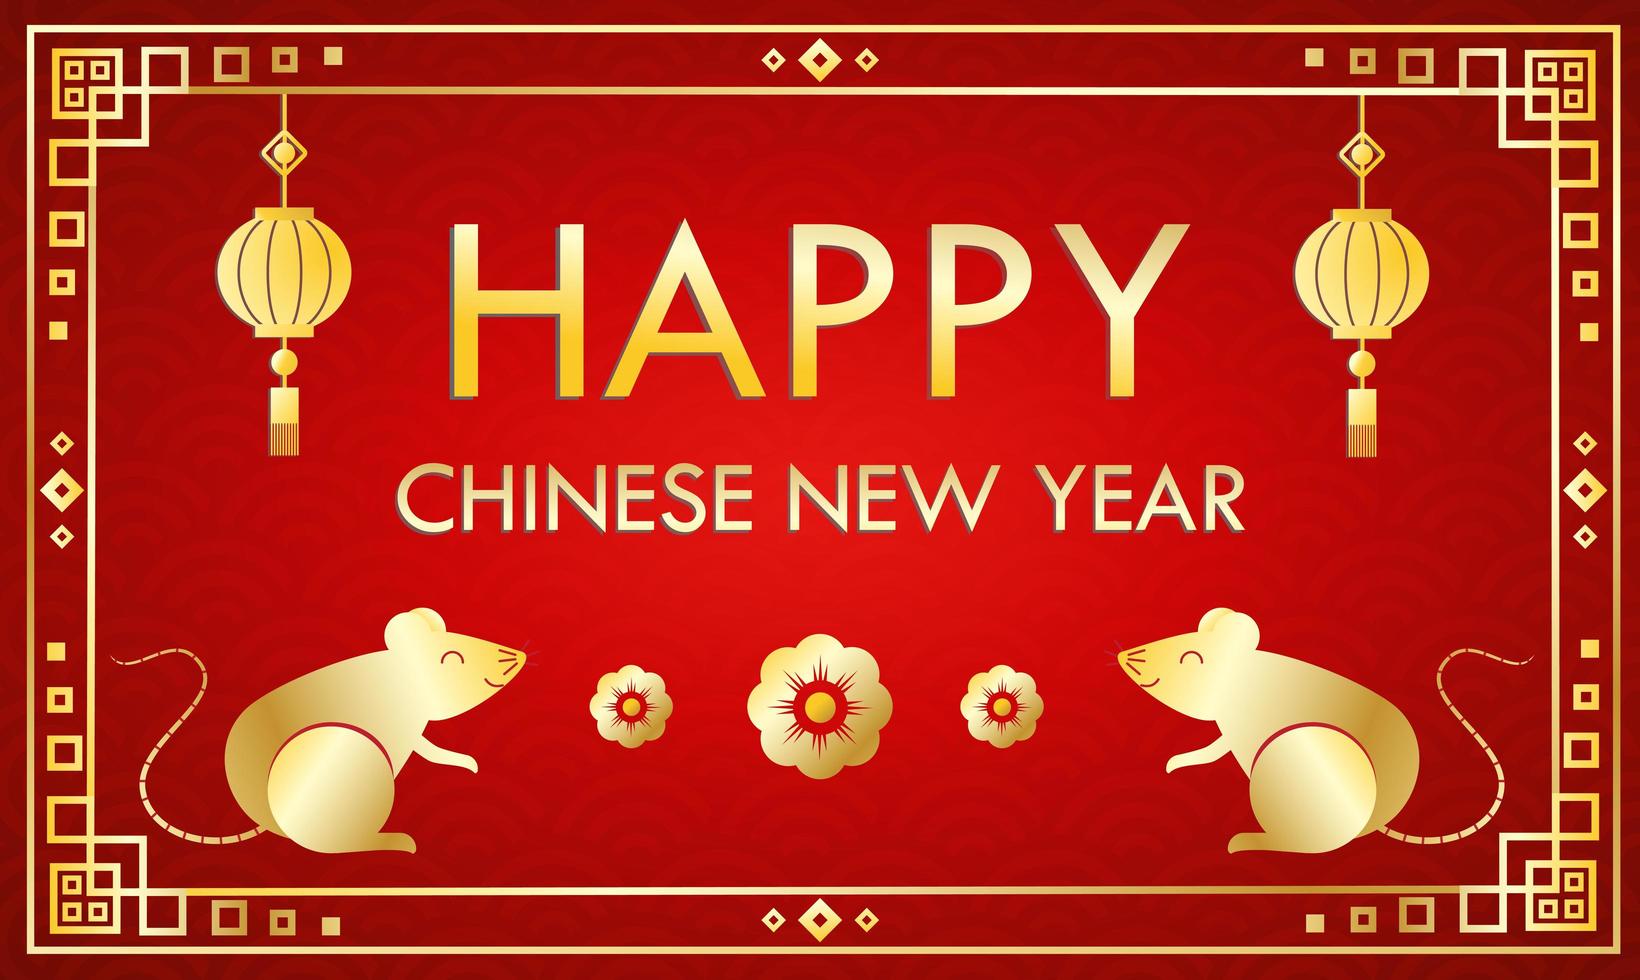 Happy Chinese New Year greeting card template on red background vector